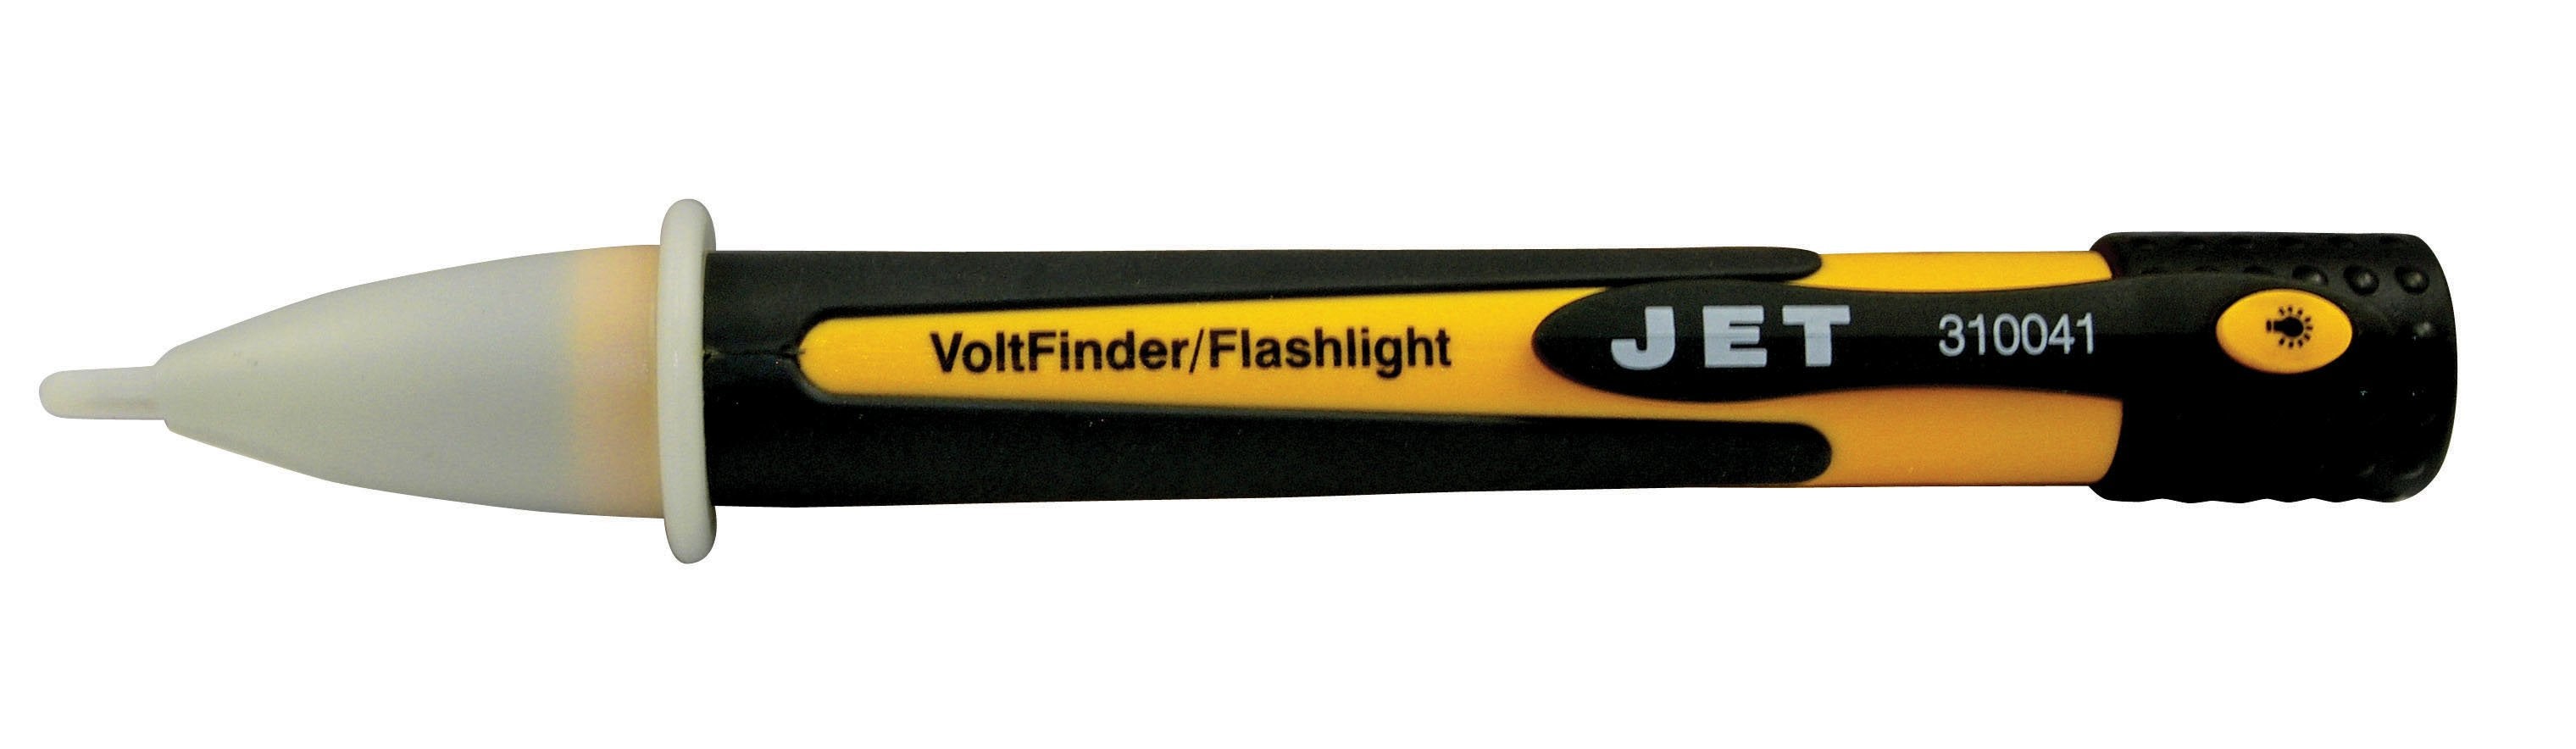 Jet Pocket Voltage Detector with Built-In Flashlight Hand Tools - Cleanflow